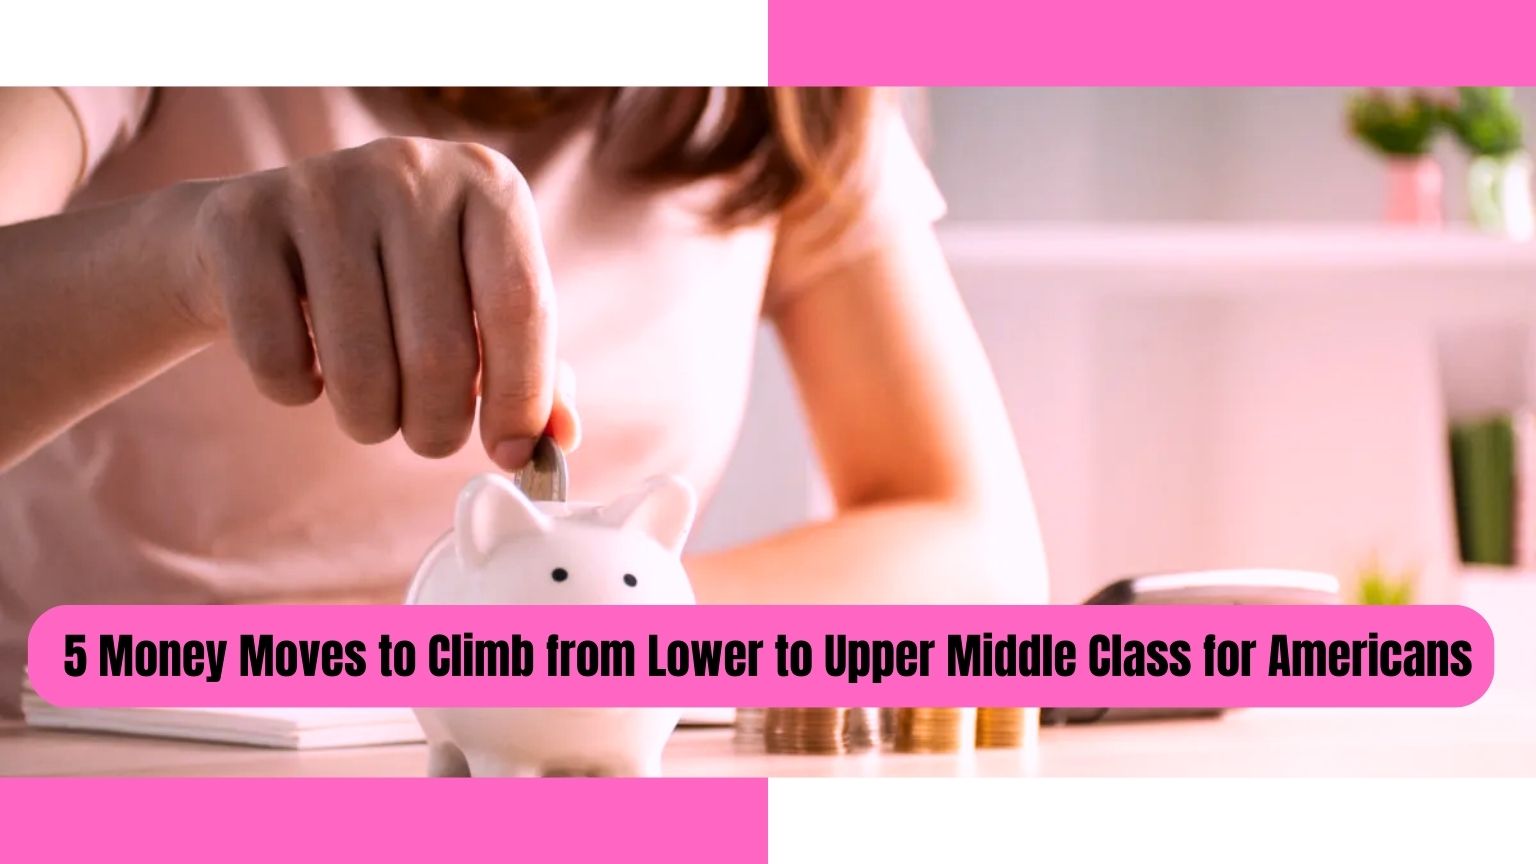 5 Money Moves to Climb from Lower to Upper Middle Class for Americans